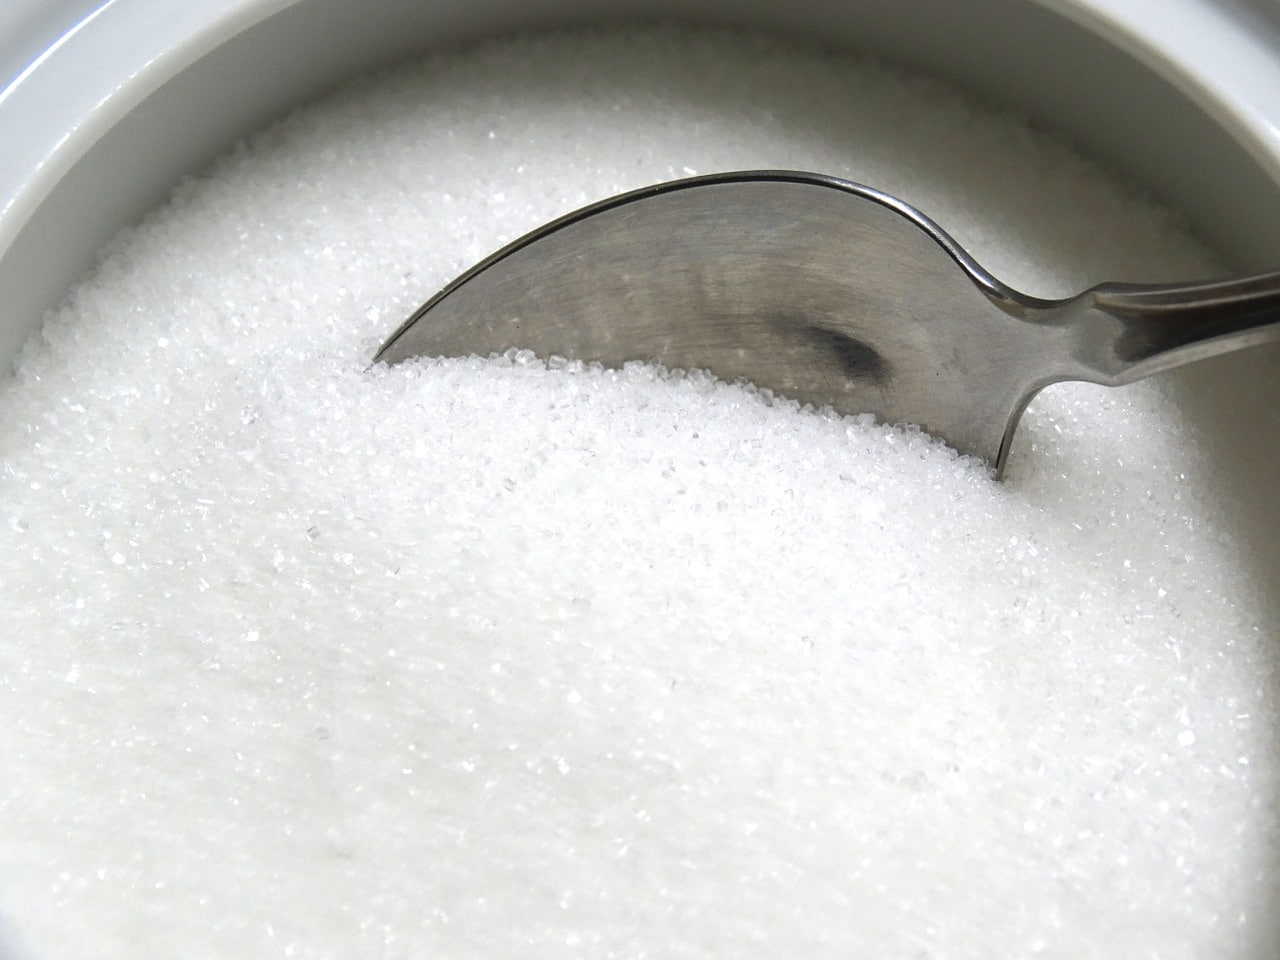 A close up of a bowl of sugar with spoon inside.